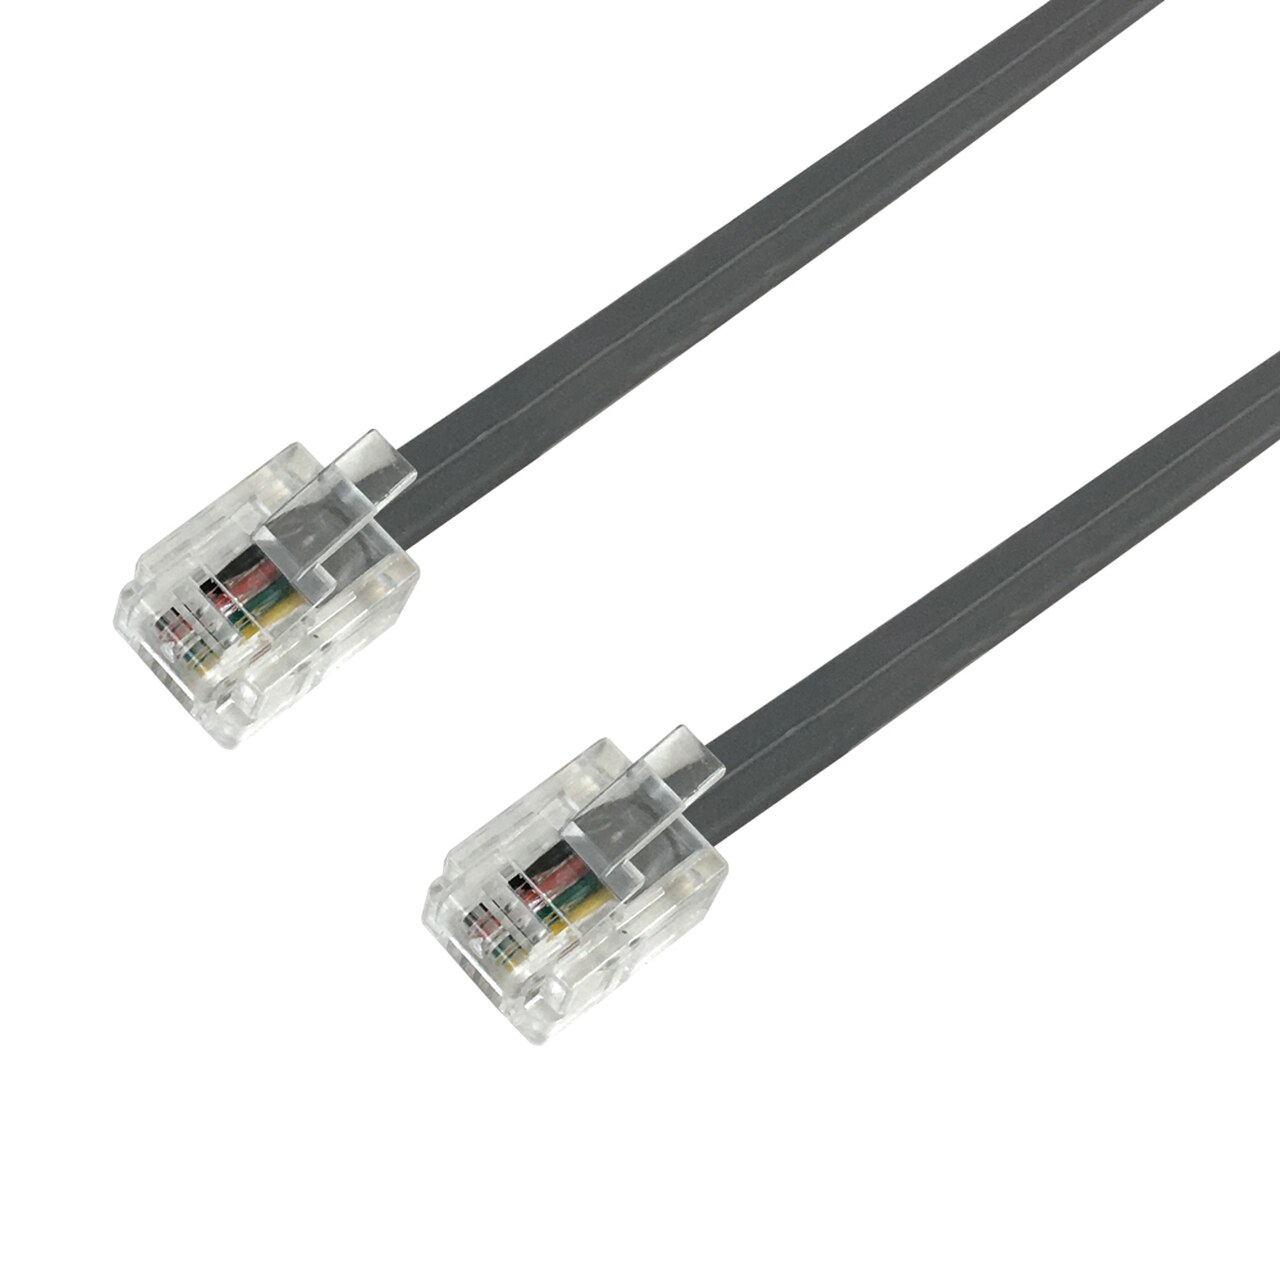 HF-CSS6P4C: 1 to 15 ft RJ11 Modular Data Telephone Cable Straight Through 6P4C - 28AWG - Silver Stain